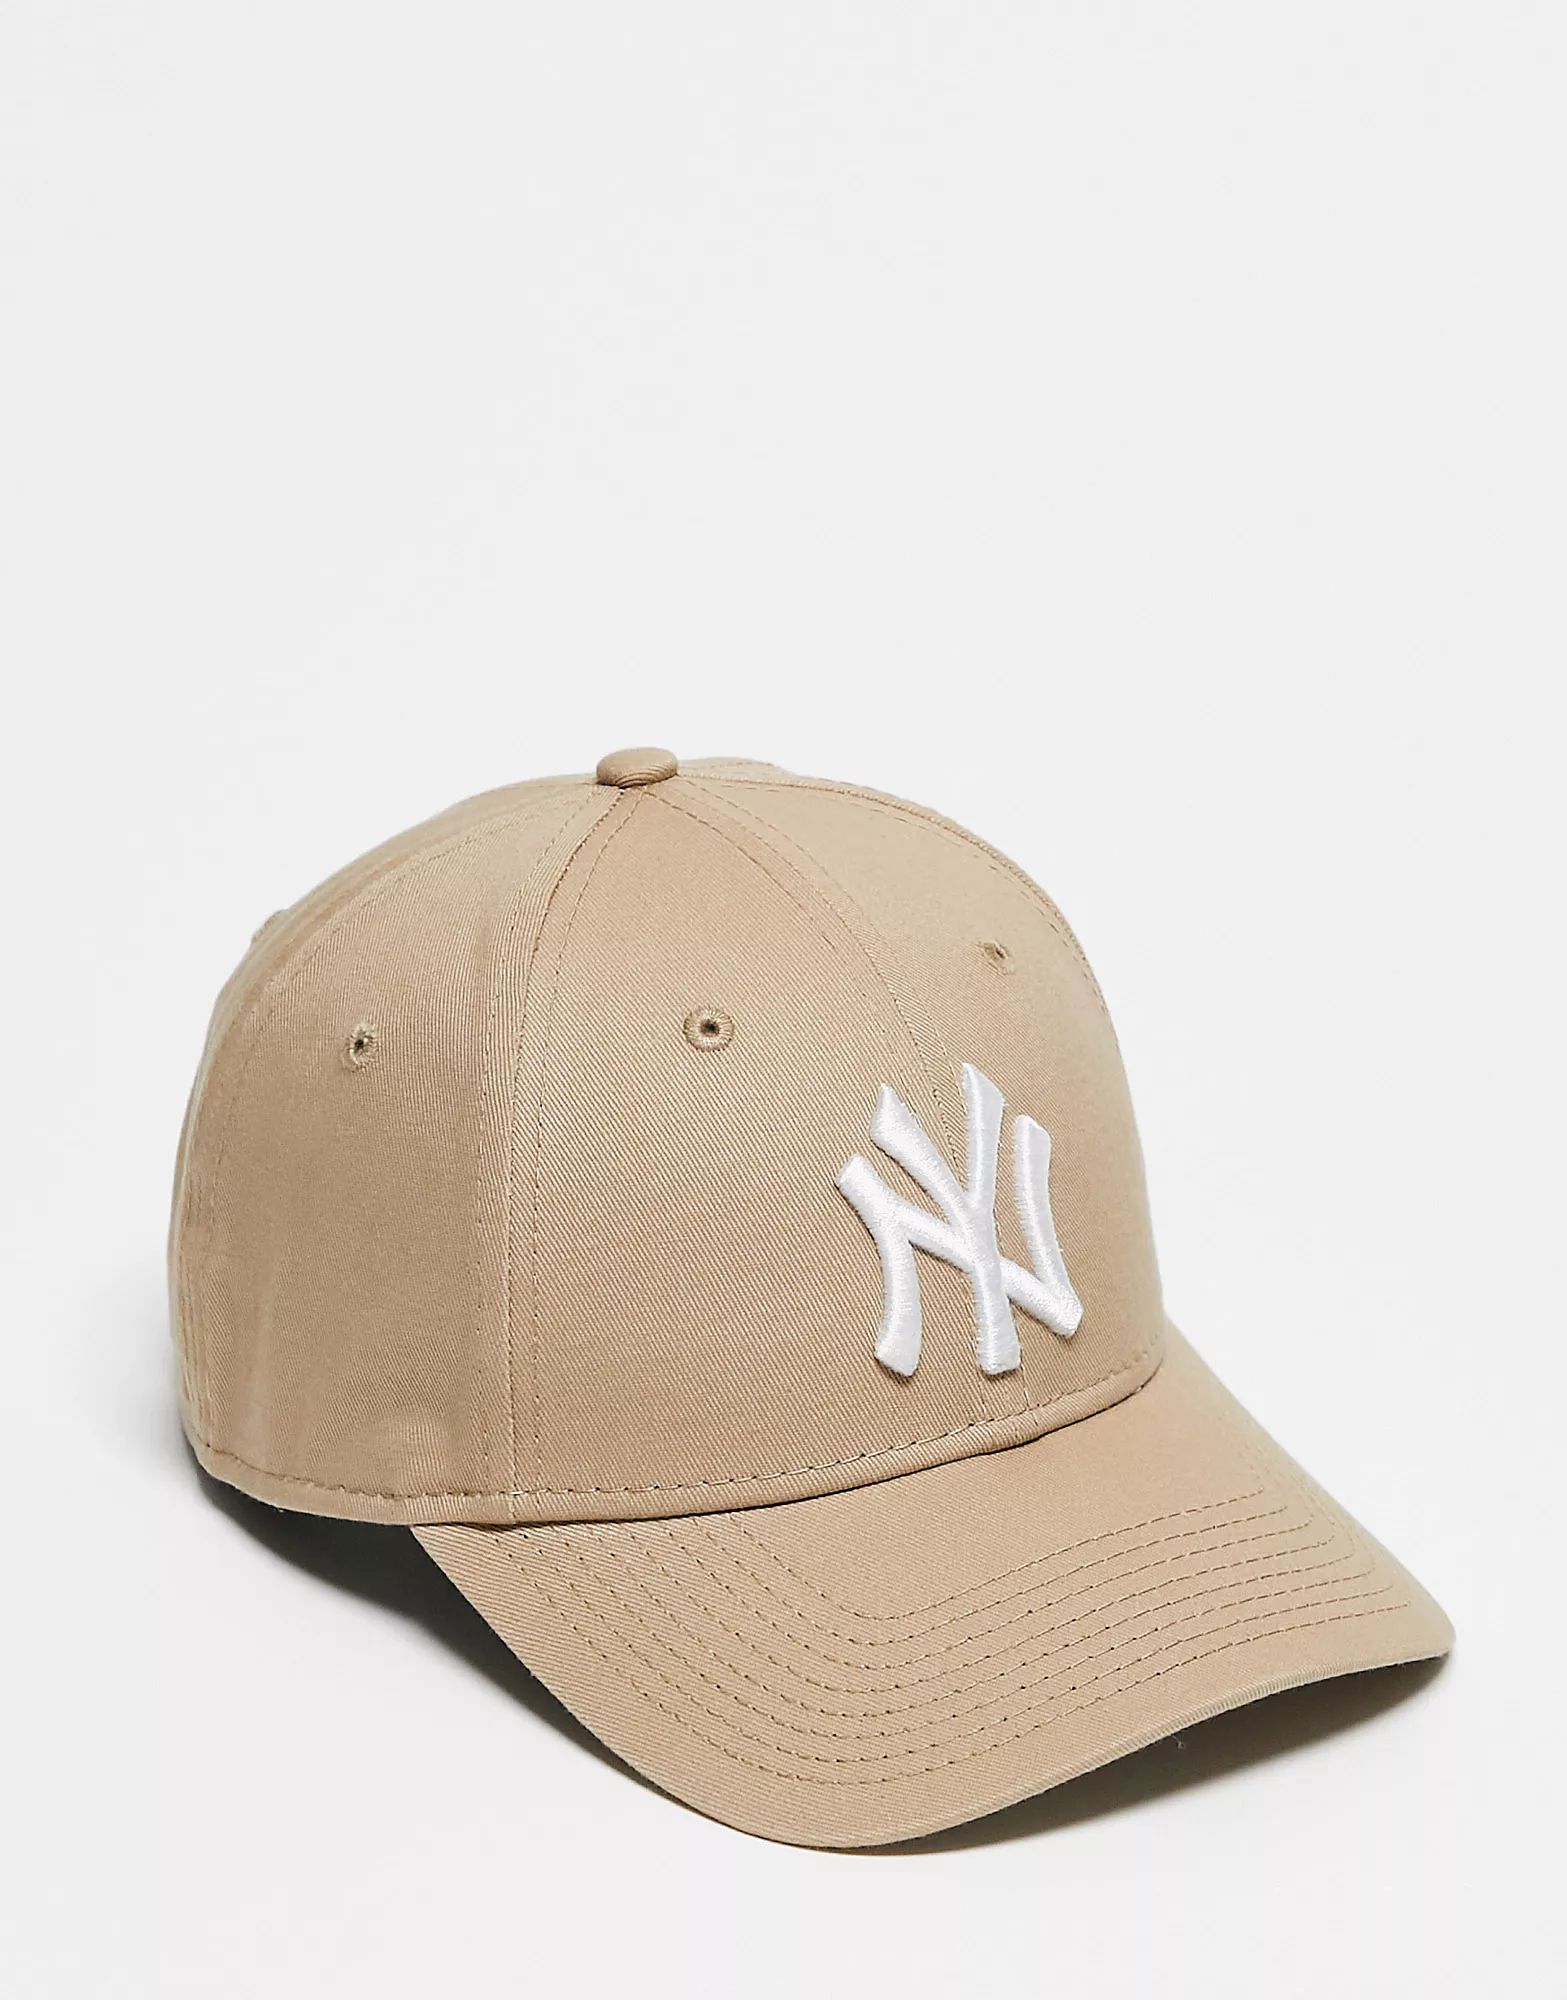 New Era 9Forty NY unisex cap in light brown | ASOS (Global)